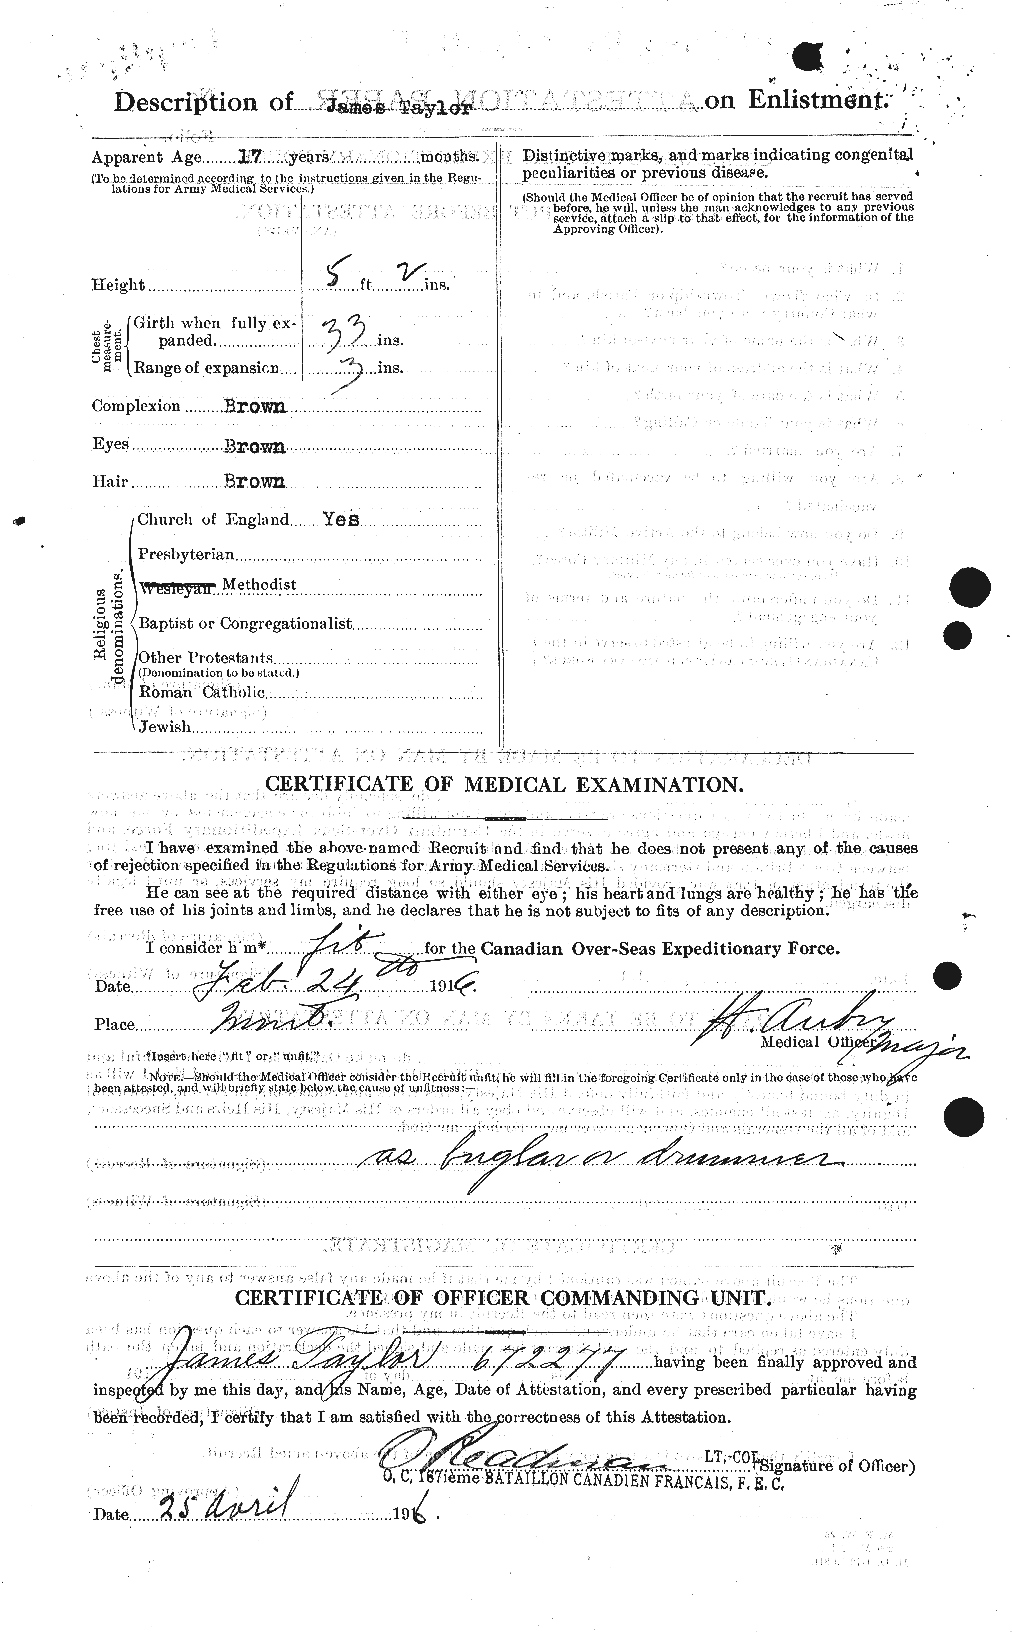 Personnel Records of the First World War - CEF 626689b